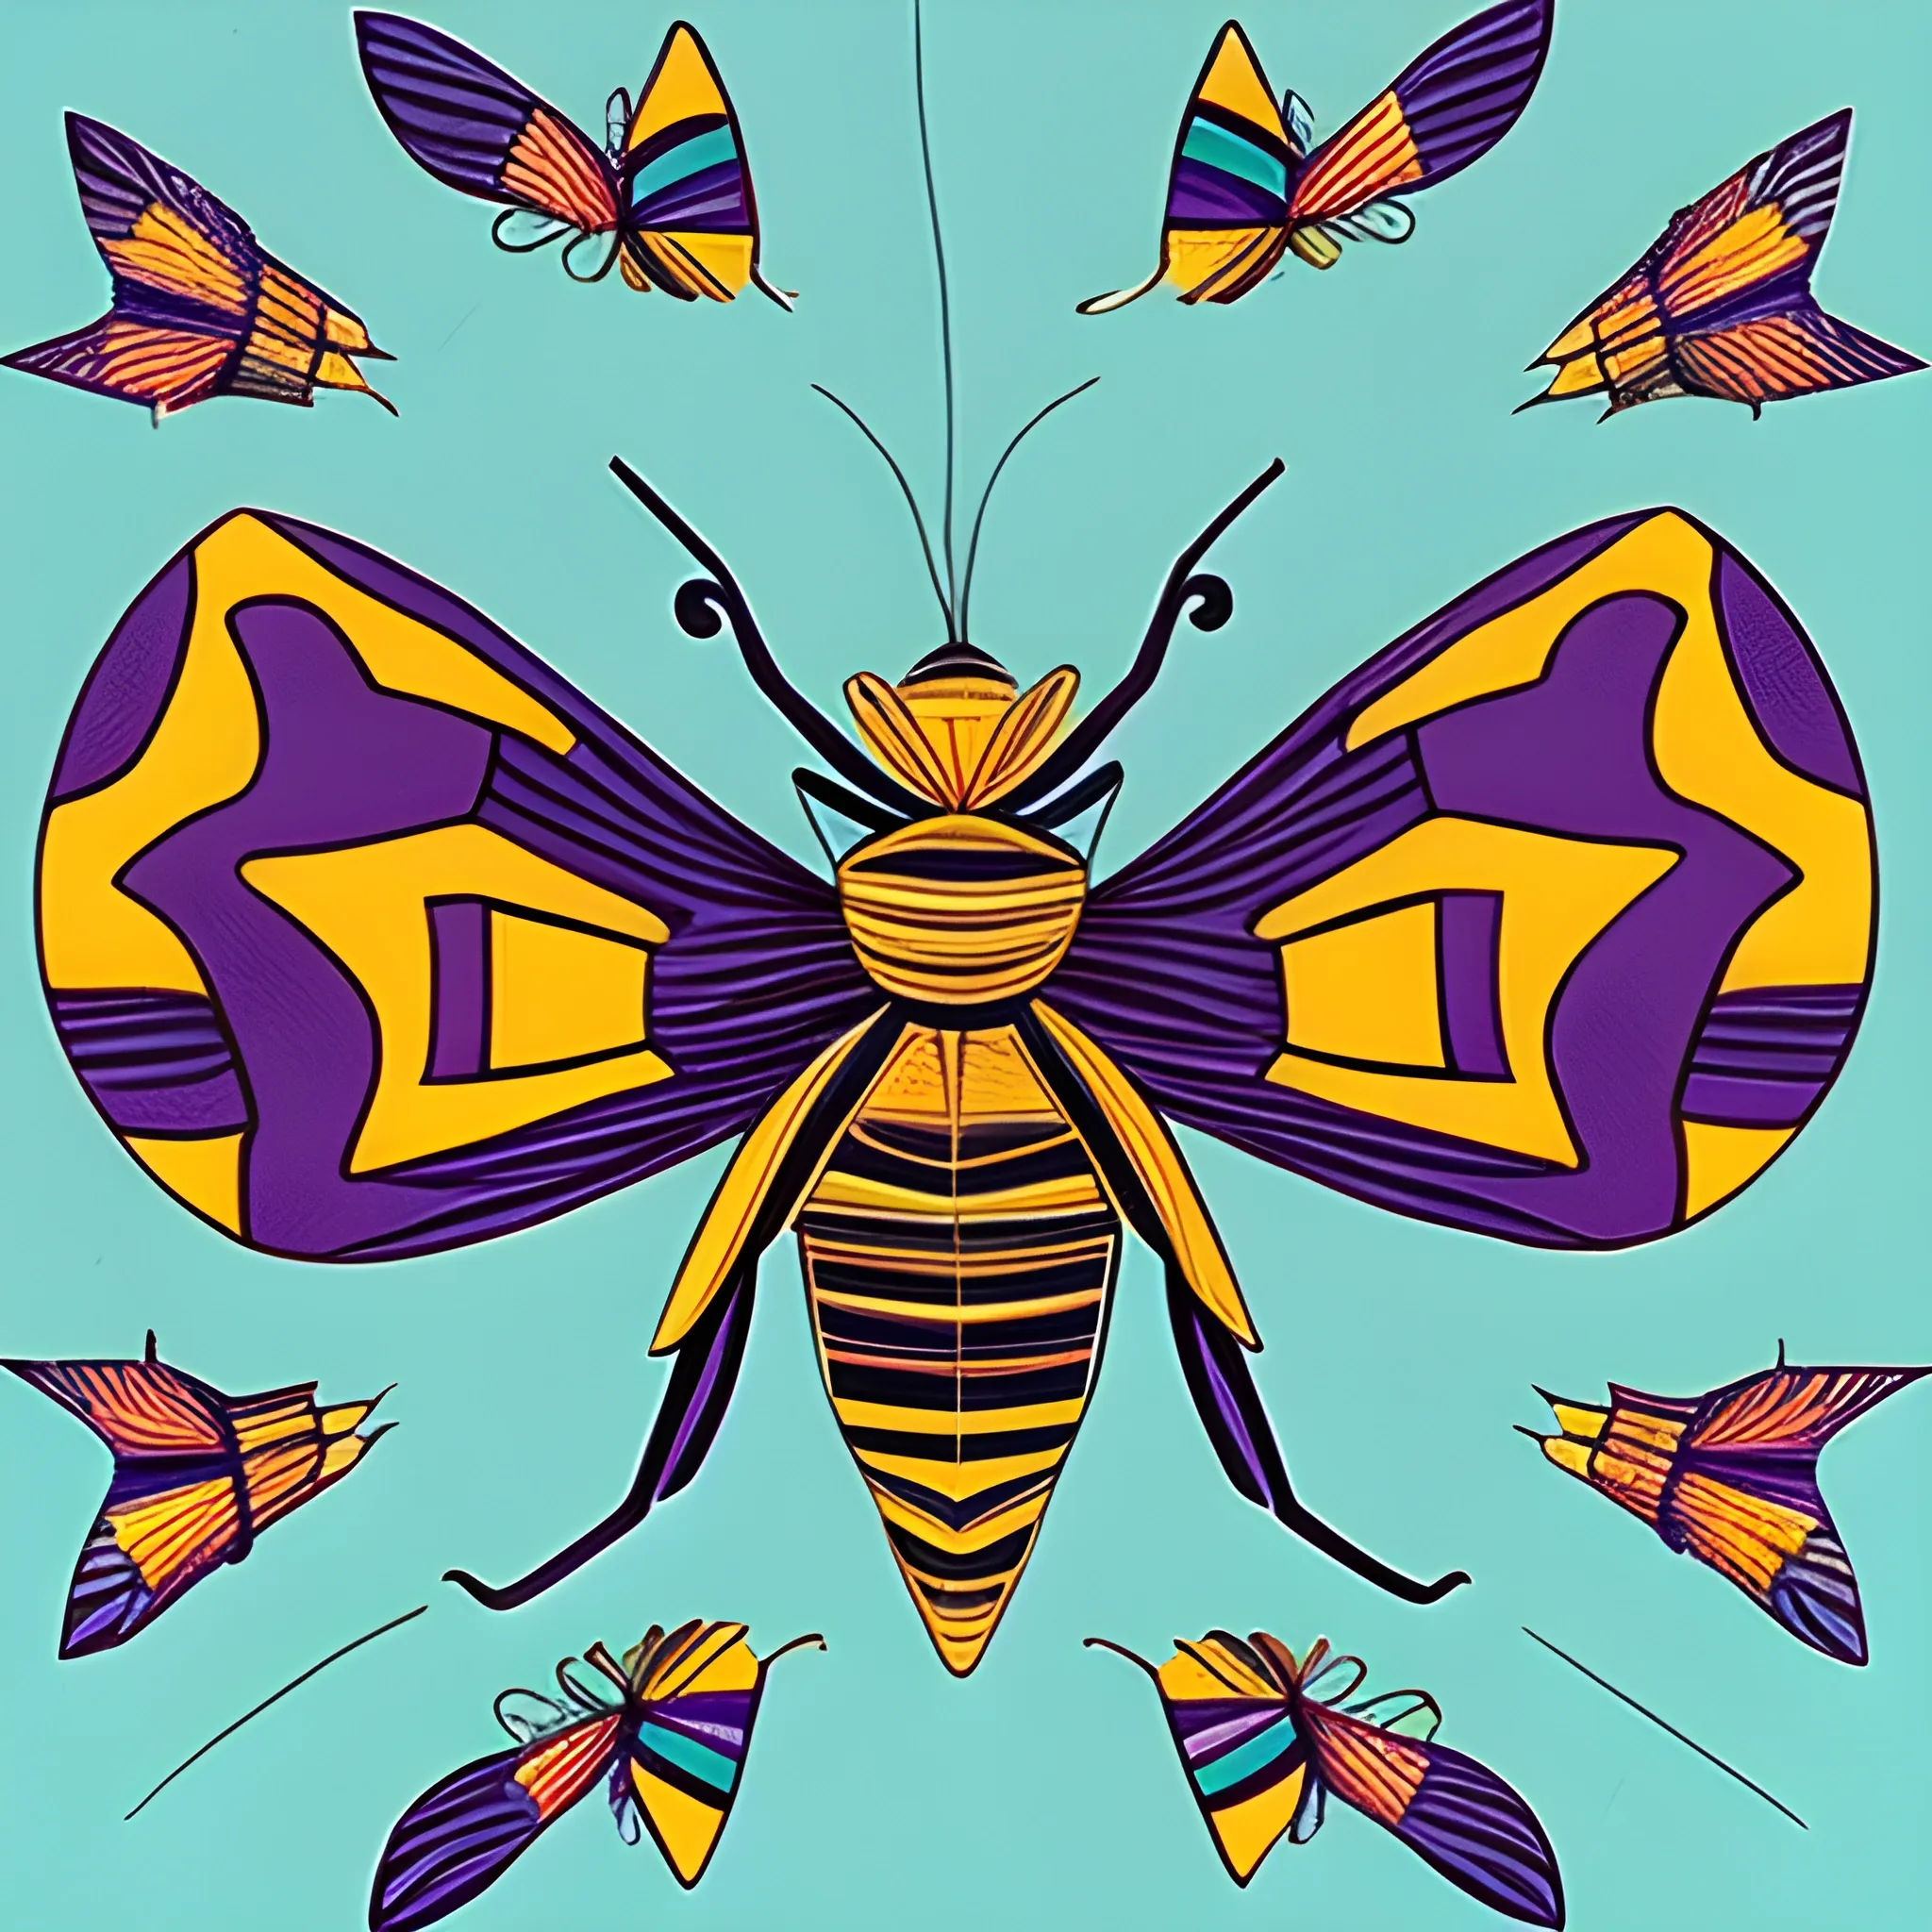 a moth flying by "Tschabalala Self" style of art. specifically using the example of the work art named "floor dance"